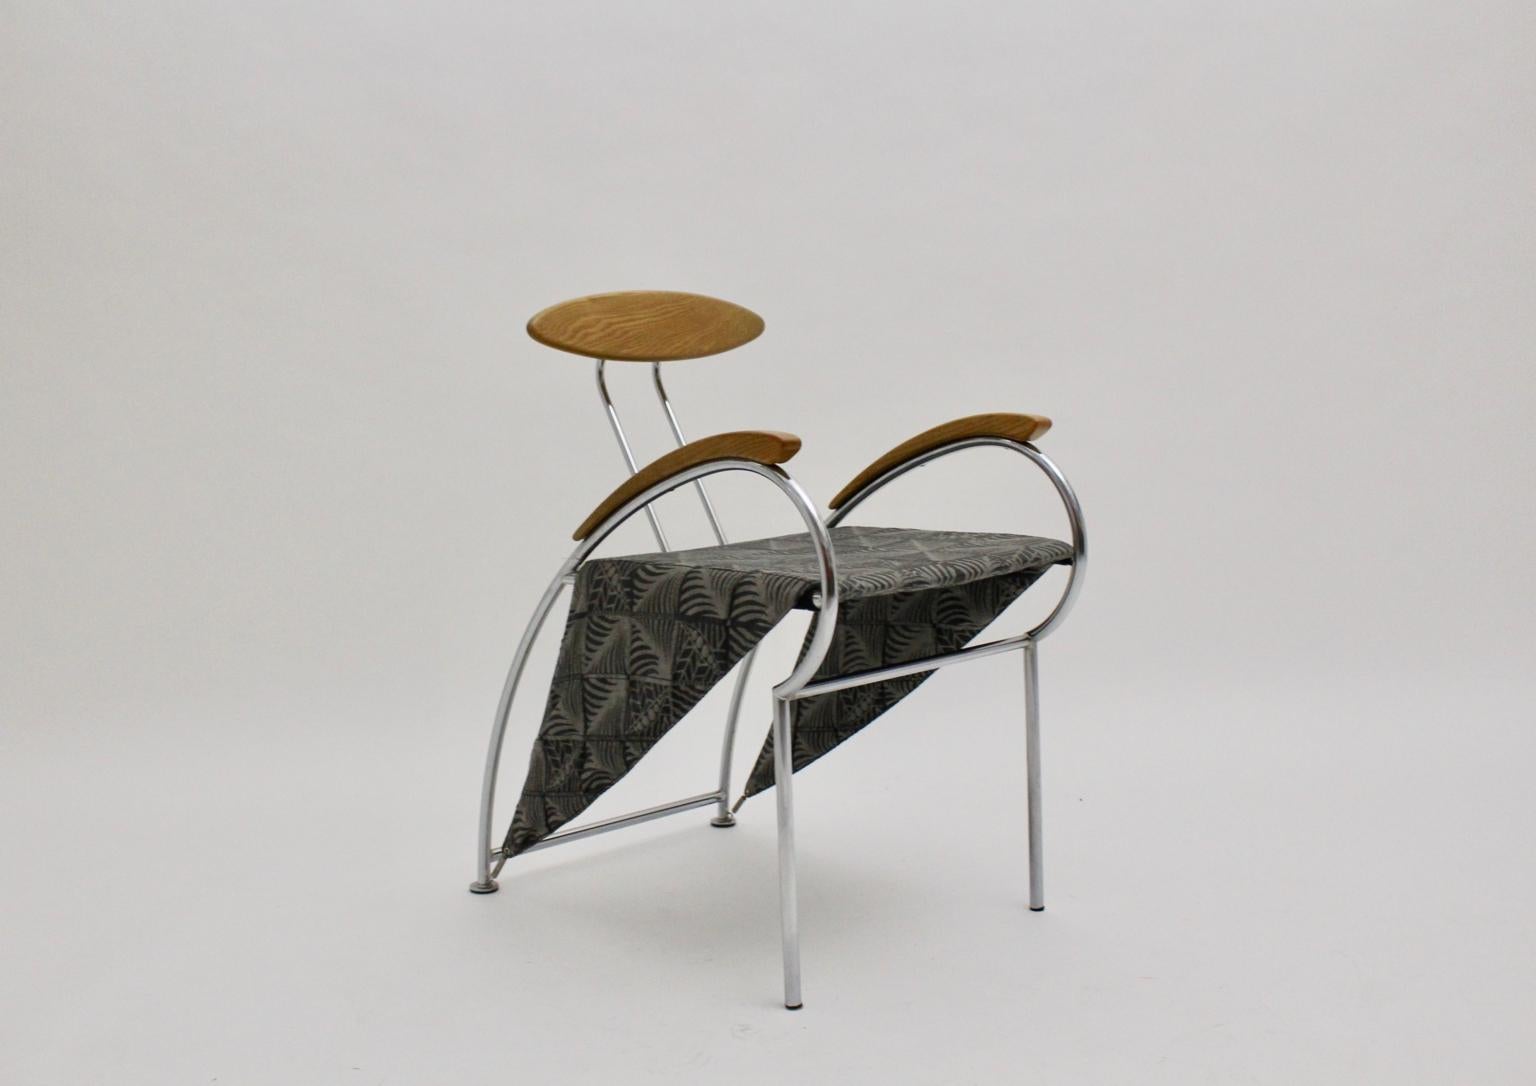 Postmodern Set of Four Vintage Dining Chair Massimo Iosa Ghini Moroso 1988 Italy For Sale 1